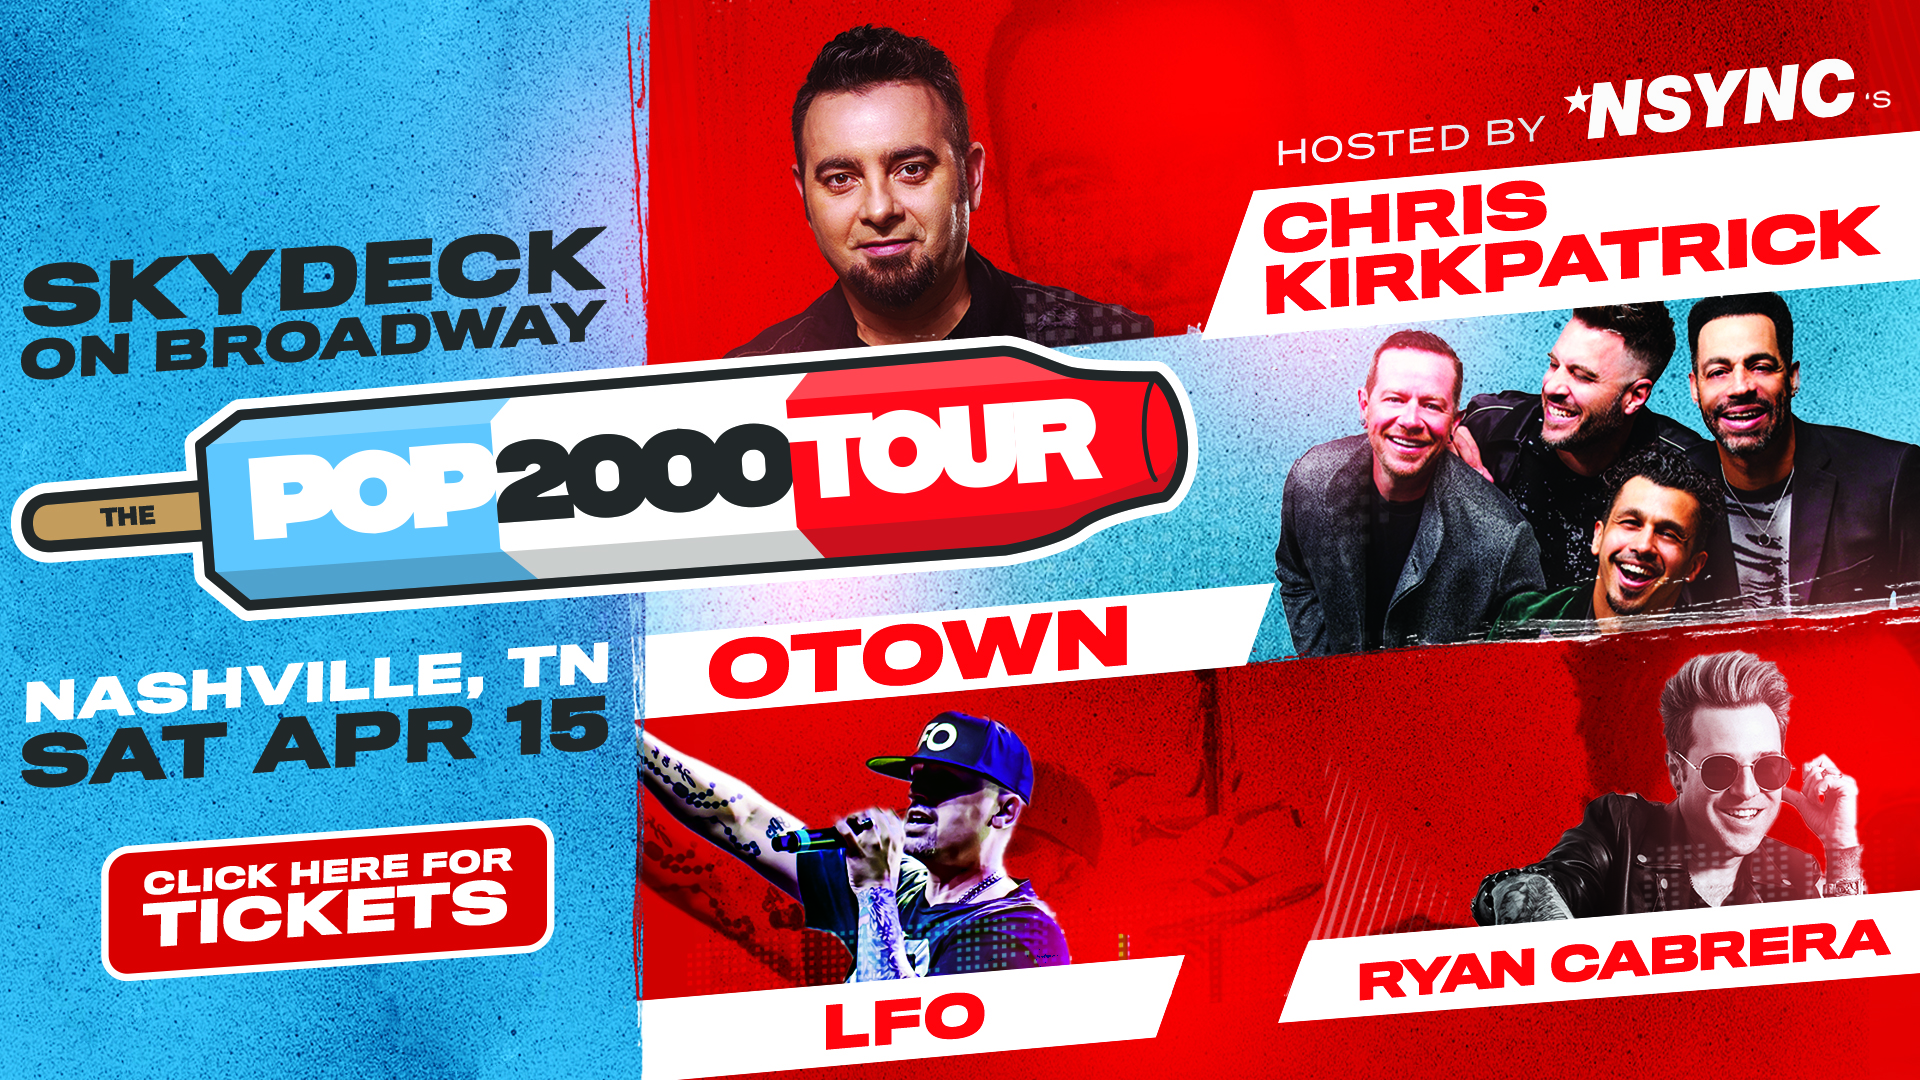 Promo image of POP 2000 Tour hosted by Chris Kirkpatrick of *NSYNC, with O-Town, Ryan Cabr...